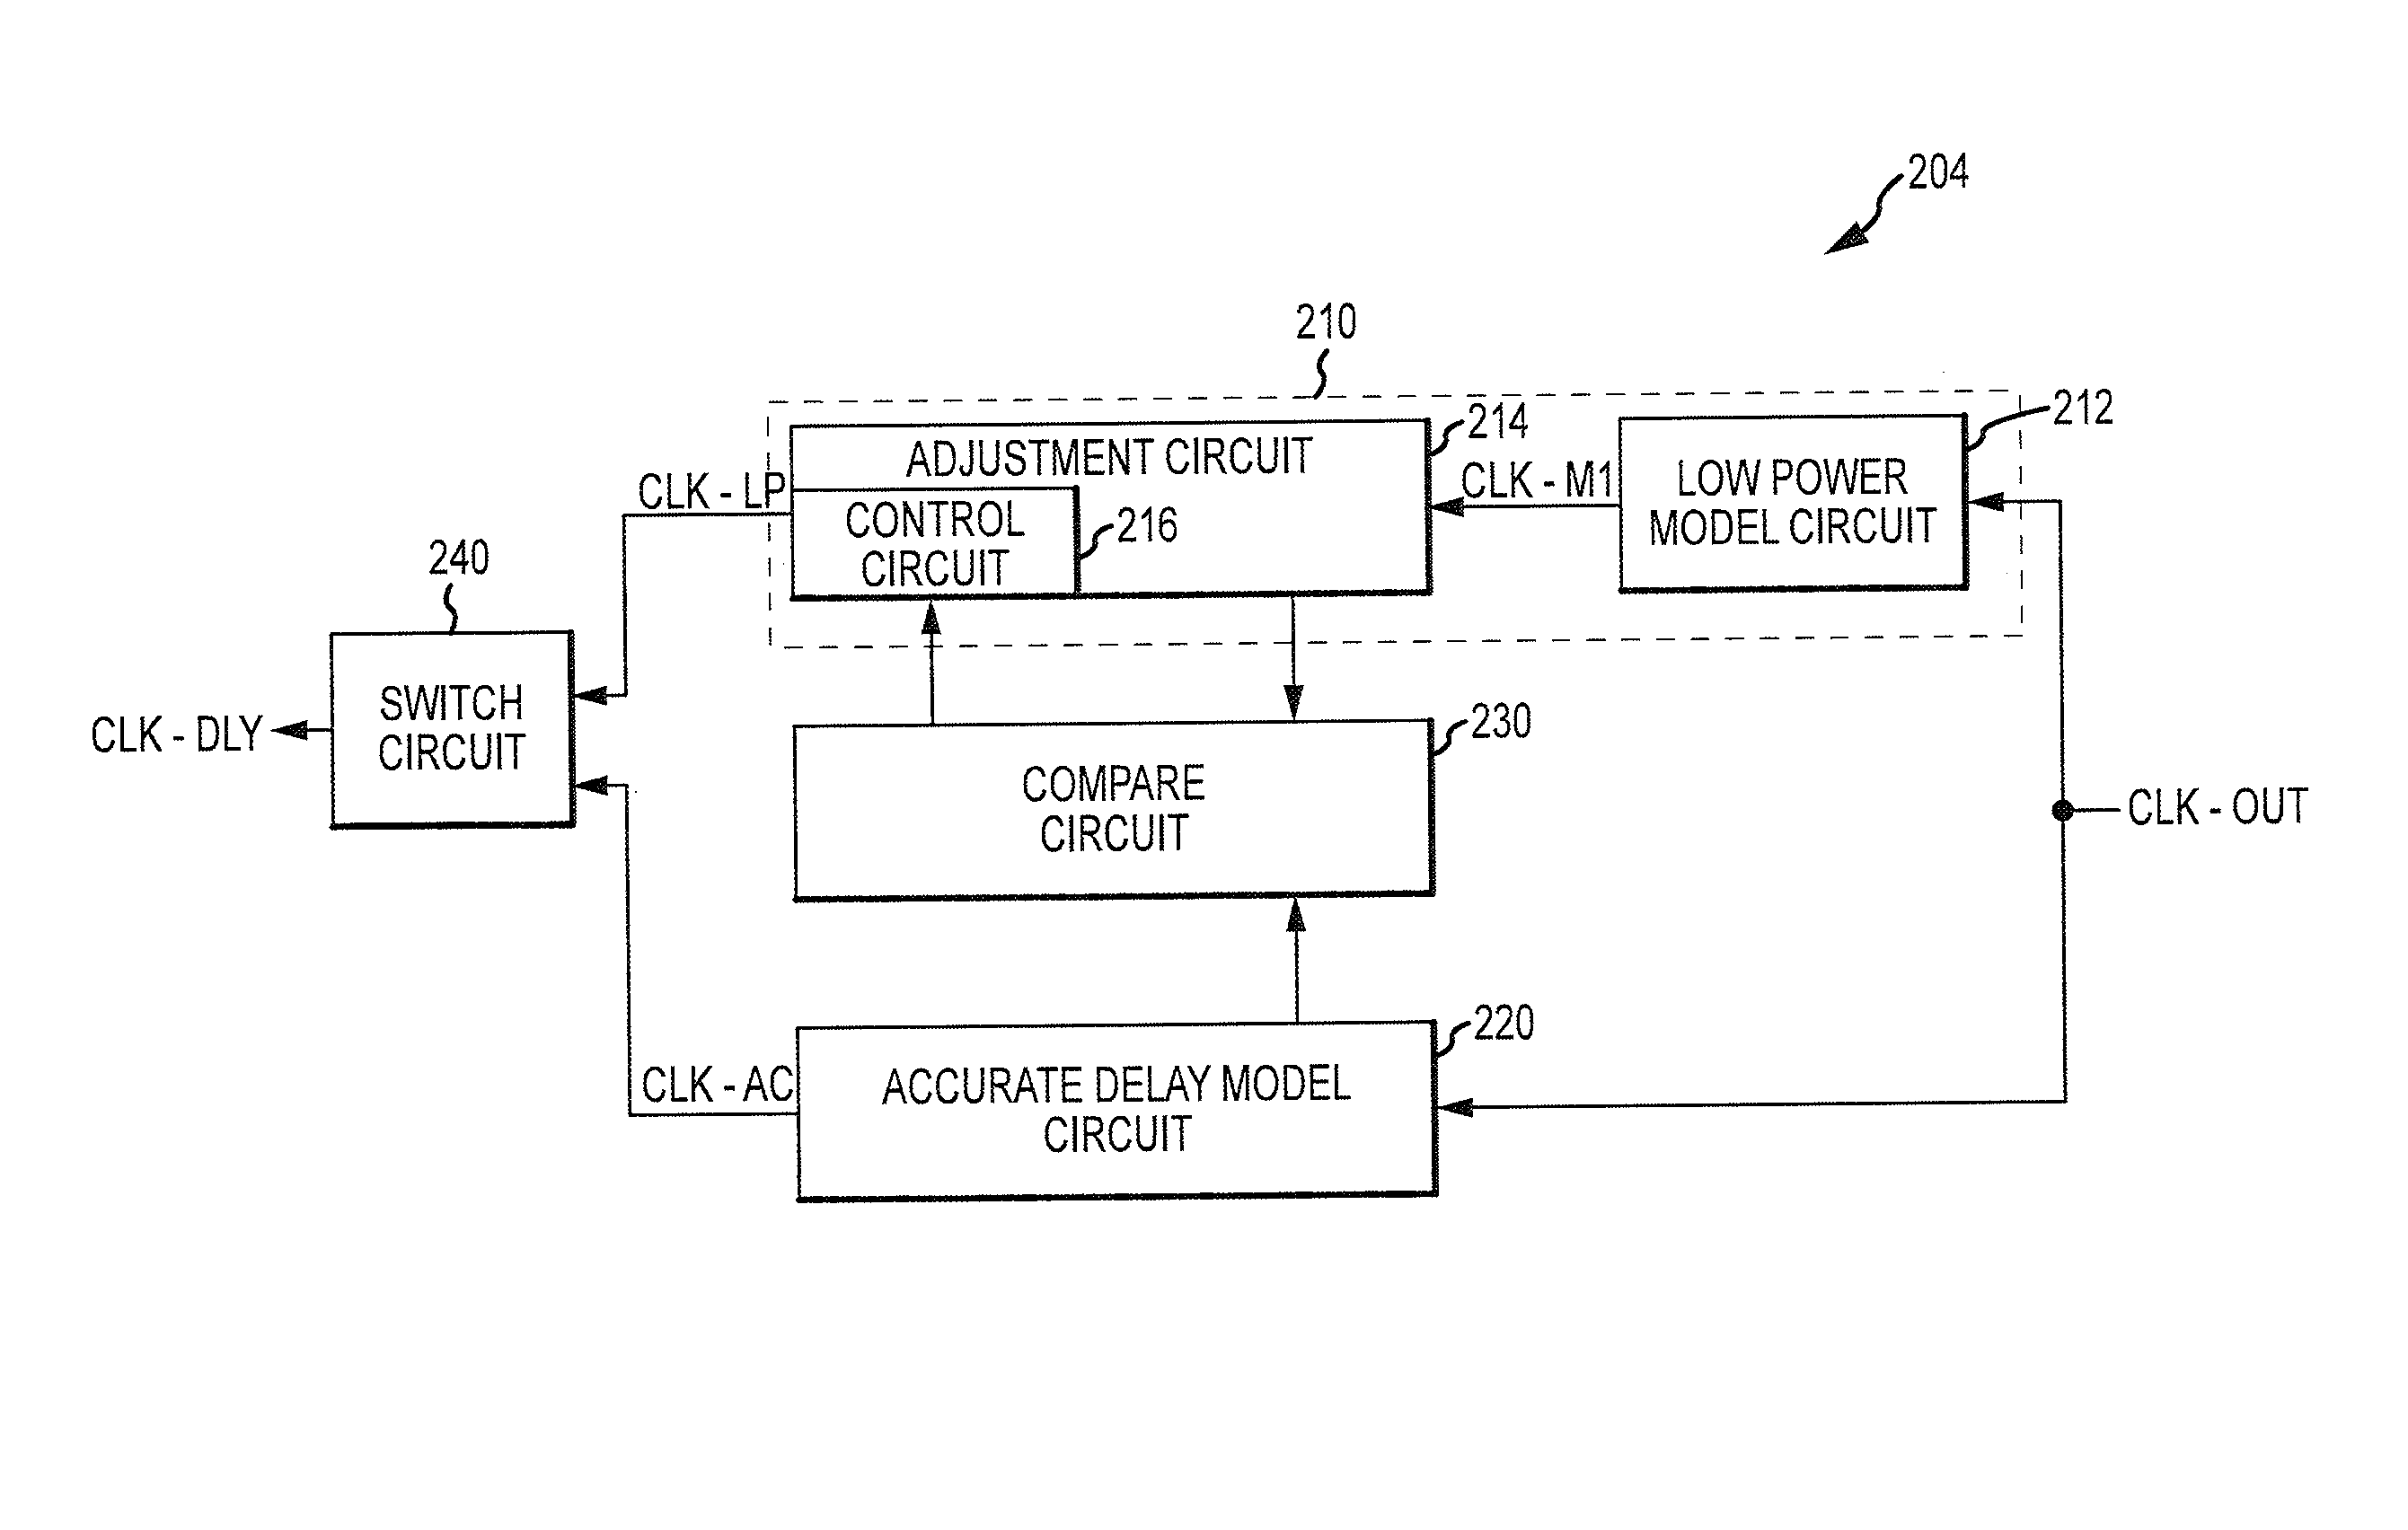 Circuits, apparatuses, and methods for delay models